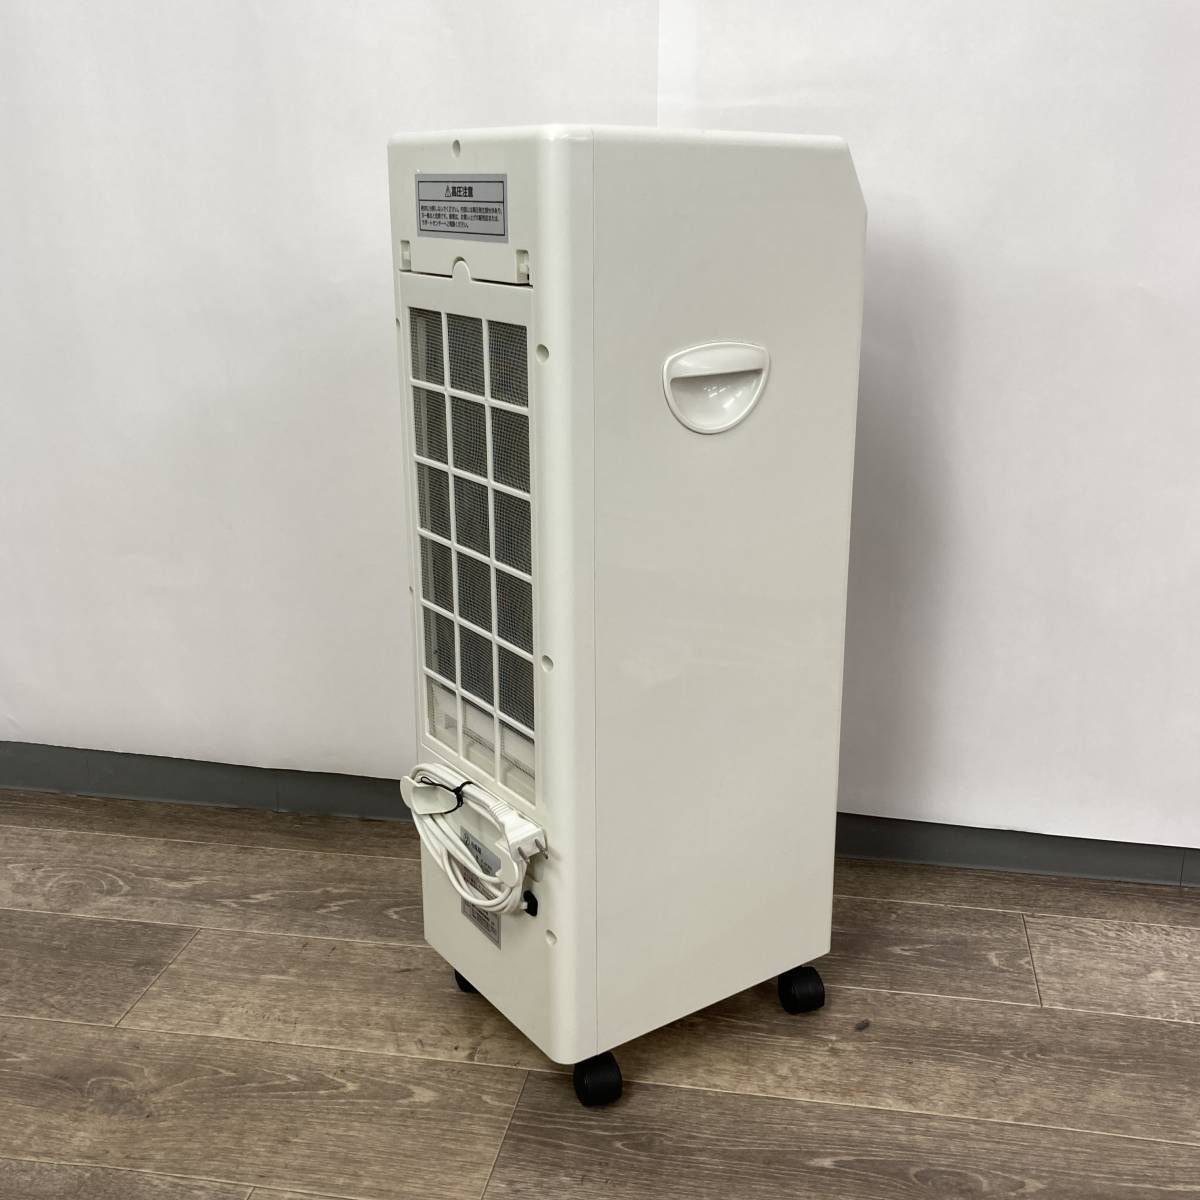 2020 year perusos cold air fan VL-DCR01 yawing air flow 3 -step electric fan small size cooler,air conditioner with casters remote control equipped .TK